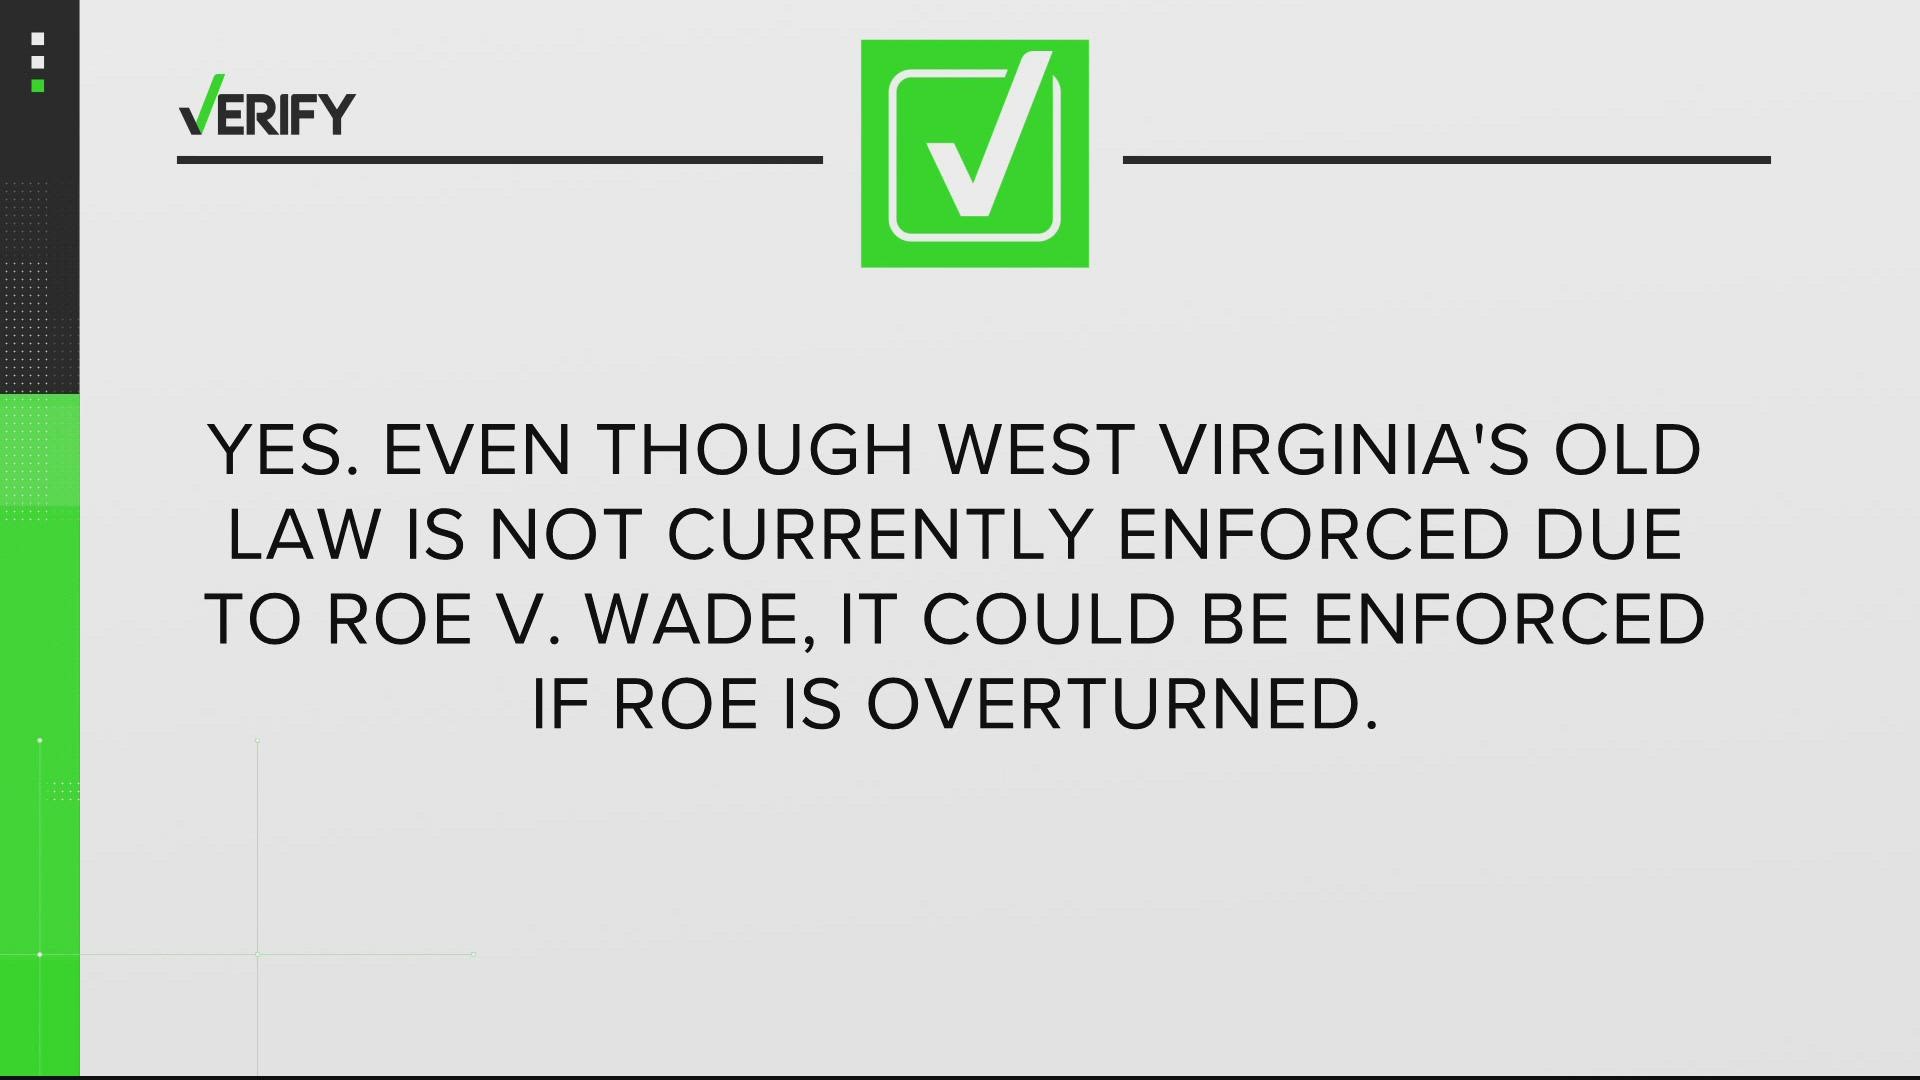 West Virginia has an abortion ban on the books from the 1840s which would go back into effect if Roe v. Wade is overturned.